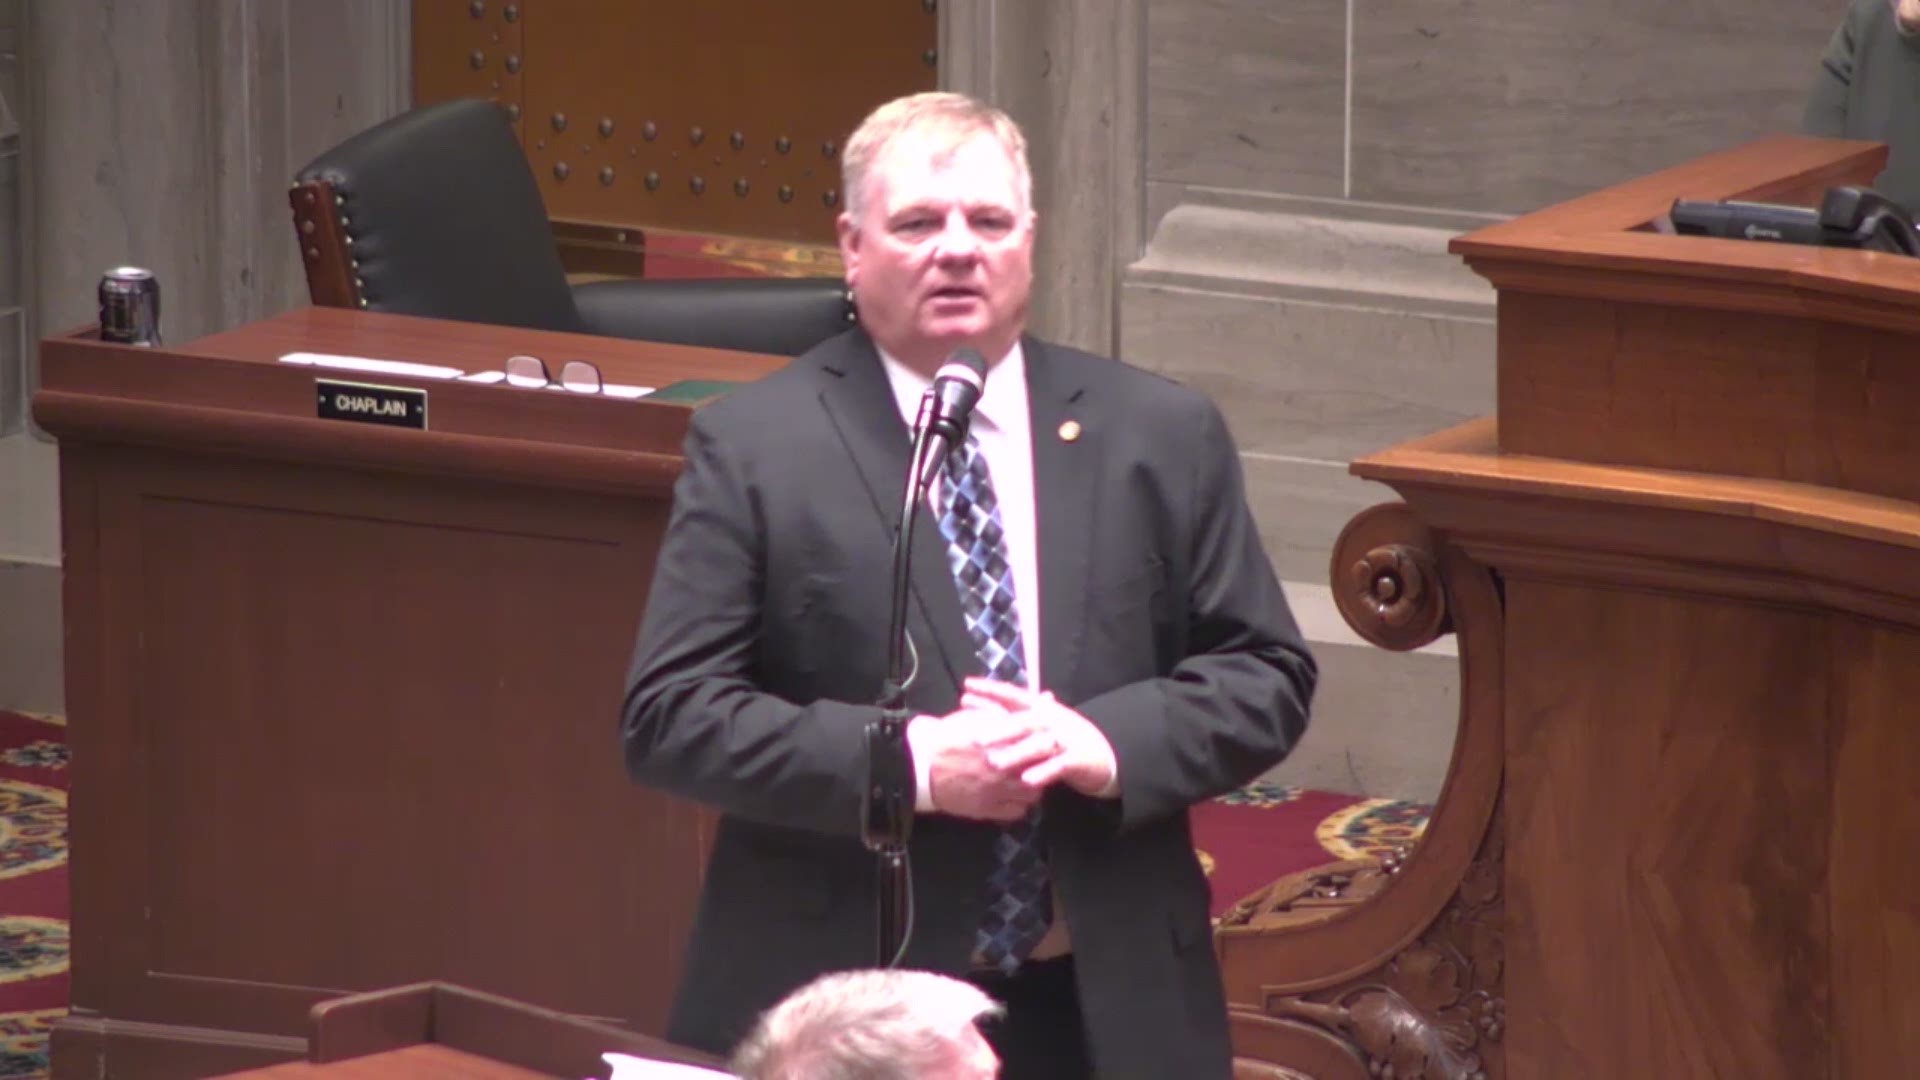 Republican Rep. Barry Hovis says he misspoke when he referred to 'consensual rapes' during a debate on an abortion bill in the Missouri legislature. One of his colleagues later jumped in to say there's no such thing as 'consensual rapes.'